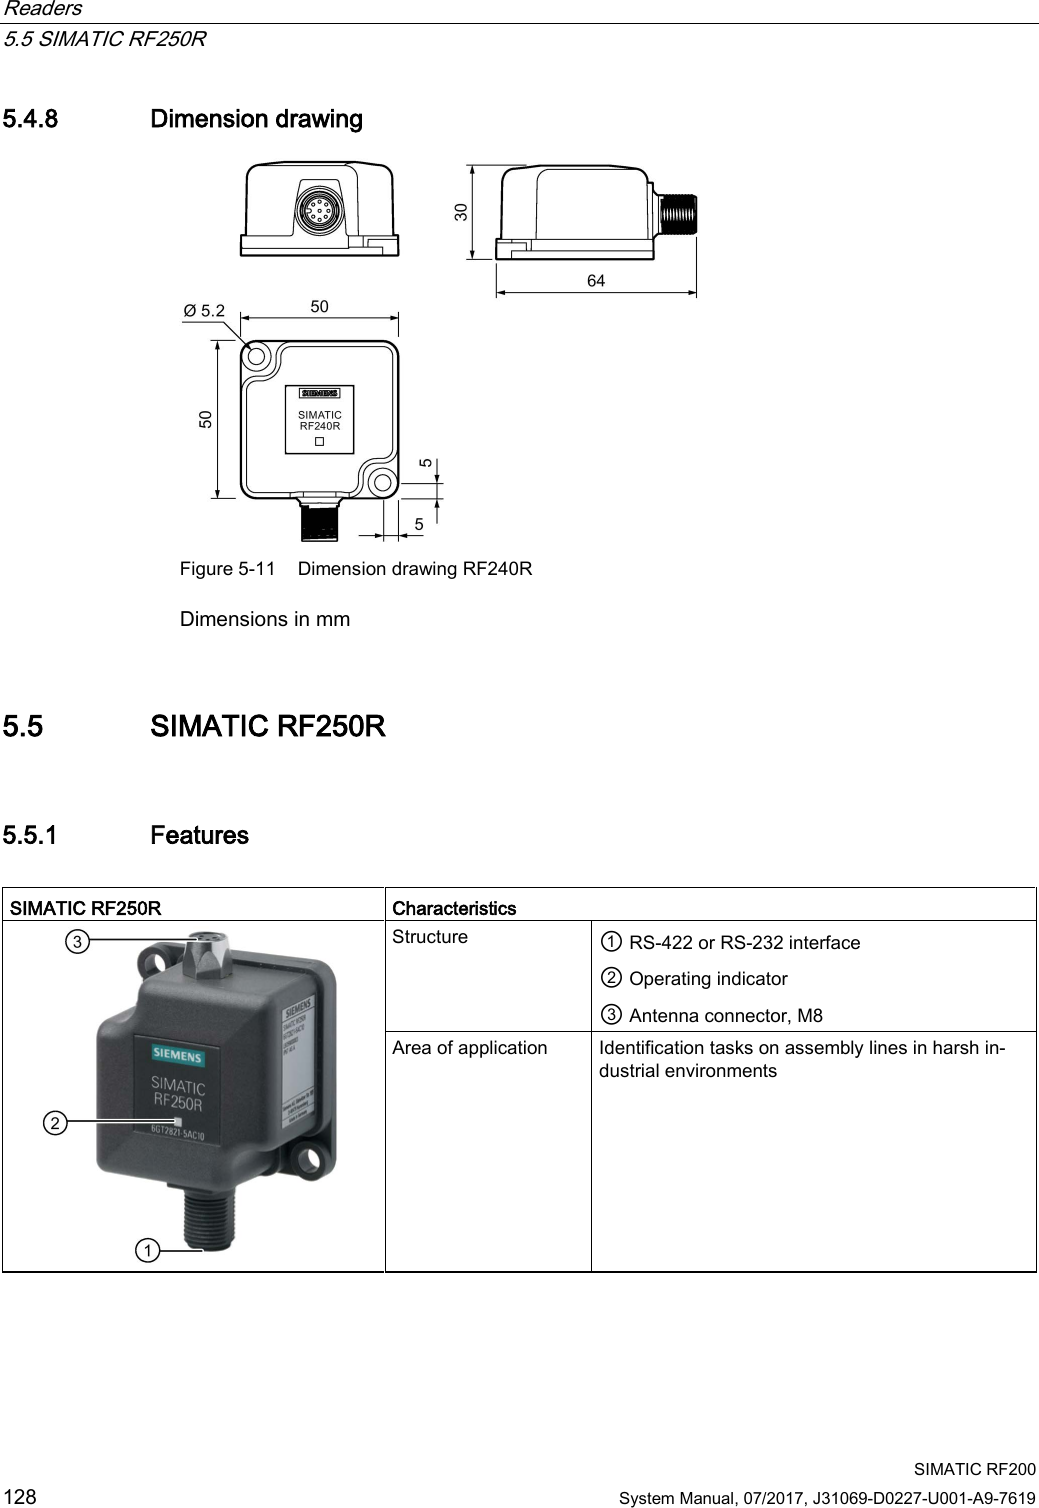 Readers   5.5 SIMATIC RF250R  SIMATIC RF200 128 System Manual, 07/2017, J31069-D0227-U001-A9-7619 5.4.8 Dimension drawing  Figure 5-11 Dimension drawing RF240R Dimensions in mm 5.5 SIMATIC RF250R 5.5.1 Features  SIMATIC RF250R  Characteristics  Structure  ① RS-422 or RS-232 interface ② Operating indicator ③ Antenna connector, M8 Area of application Identification tasks on assembly lines in harsh in-dustrial environments  